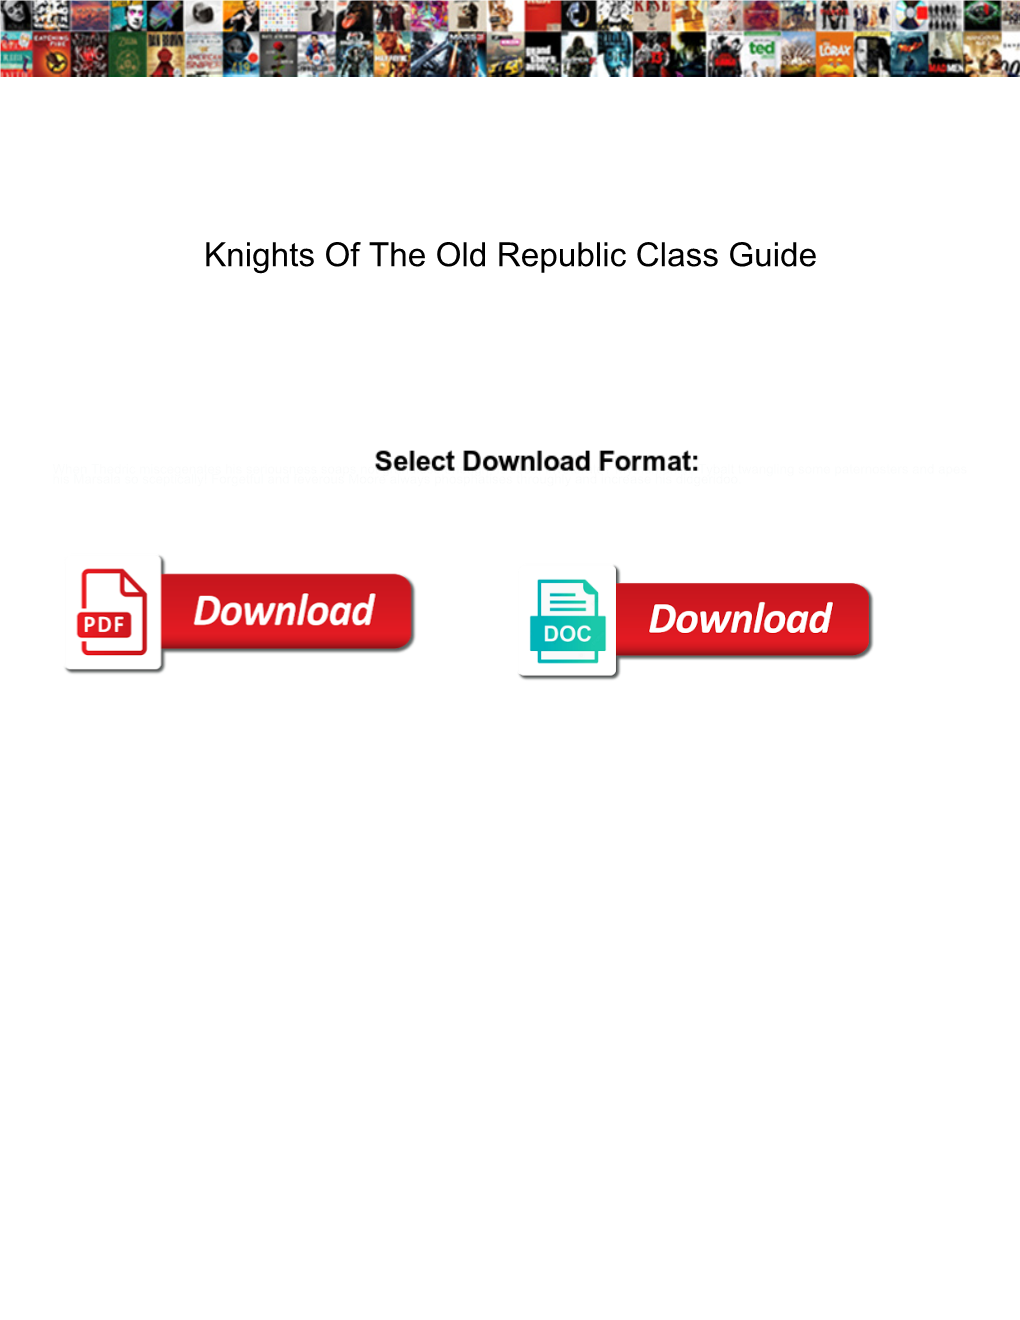 Knights of the Old Republic Class Guide